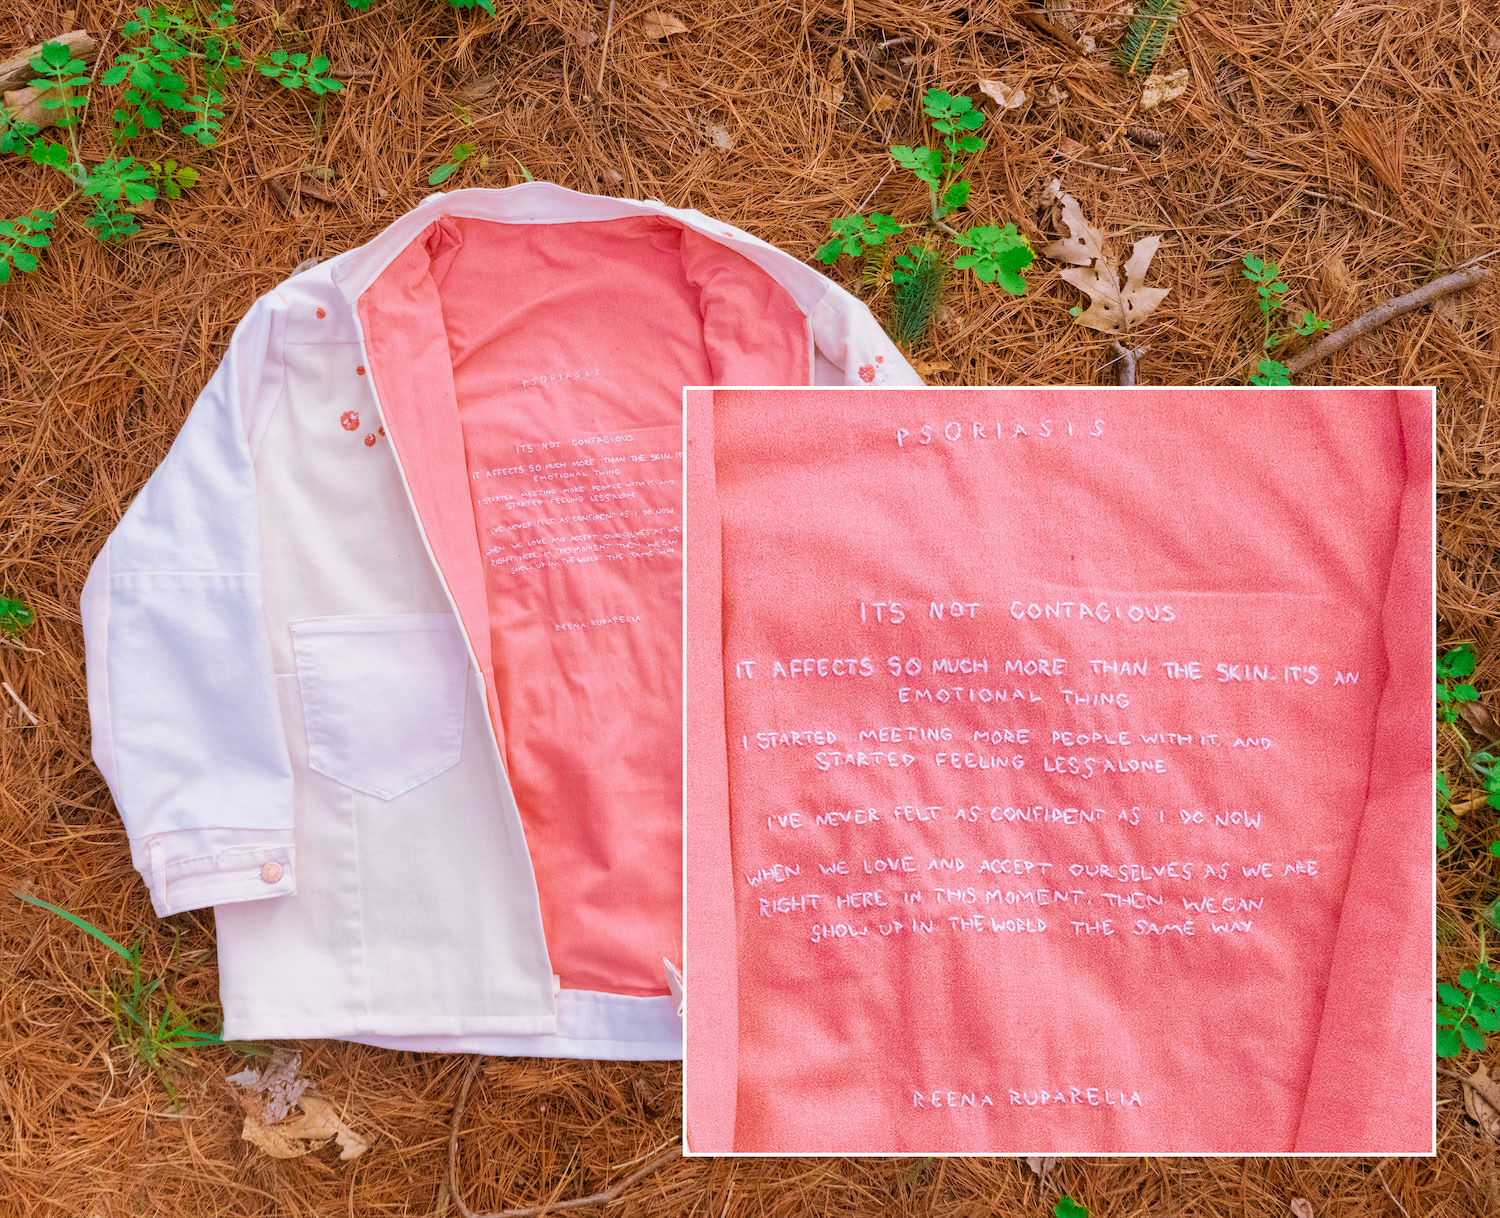 Psoriasis jacket, placed on the ground, partially opened